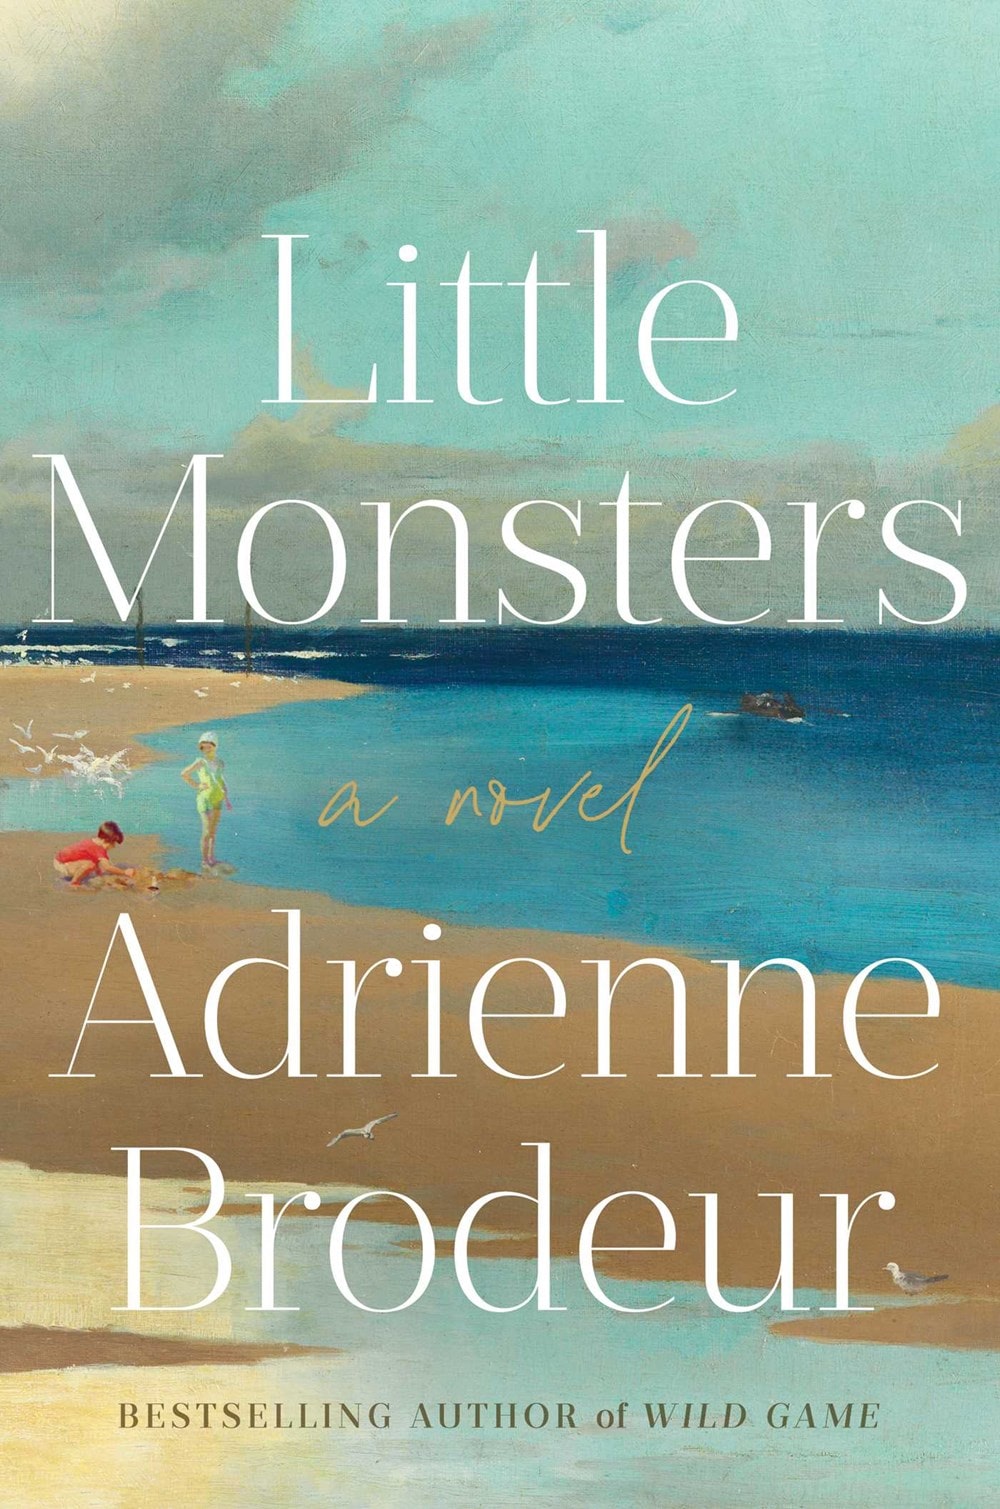 Little-Monsters-book-cover